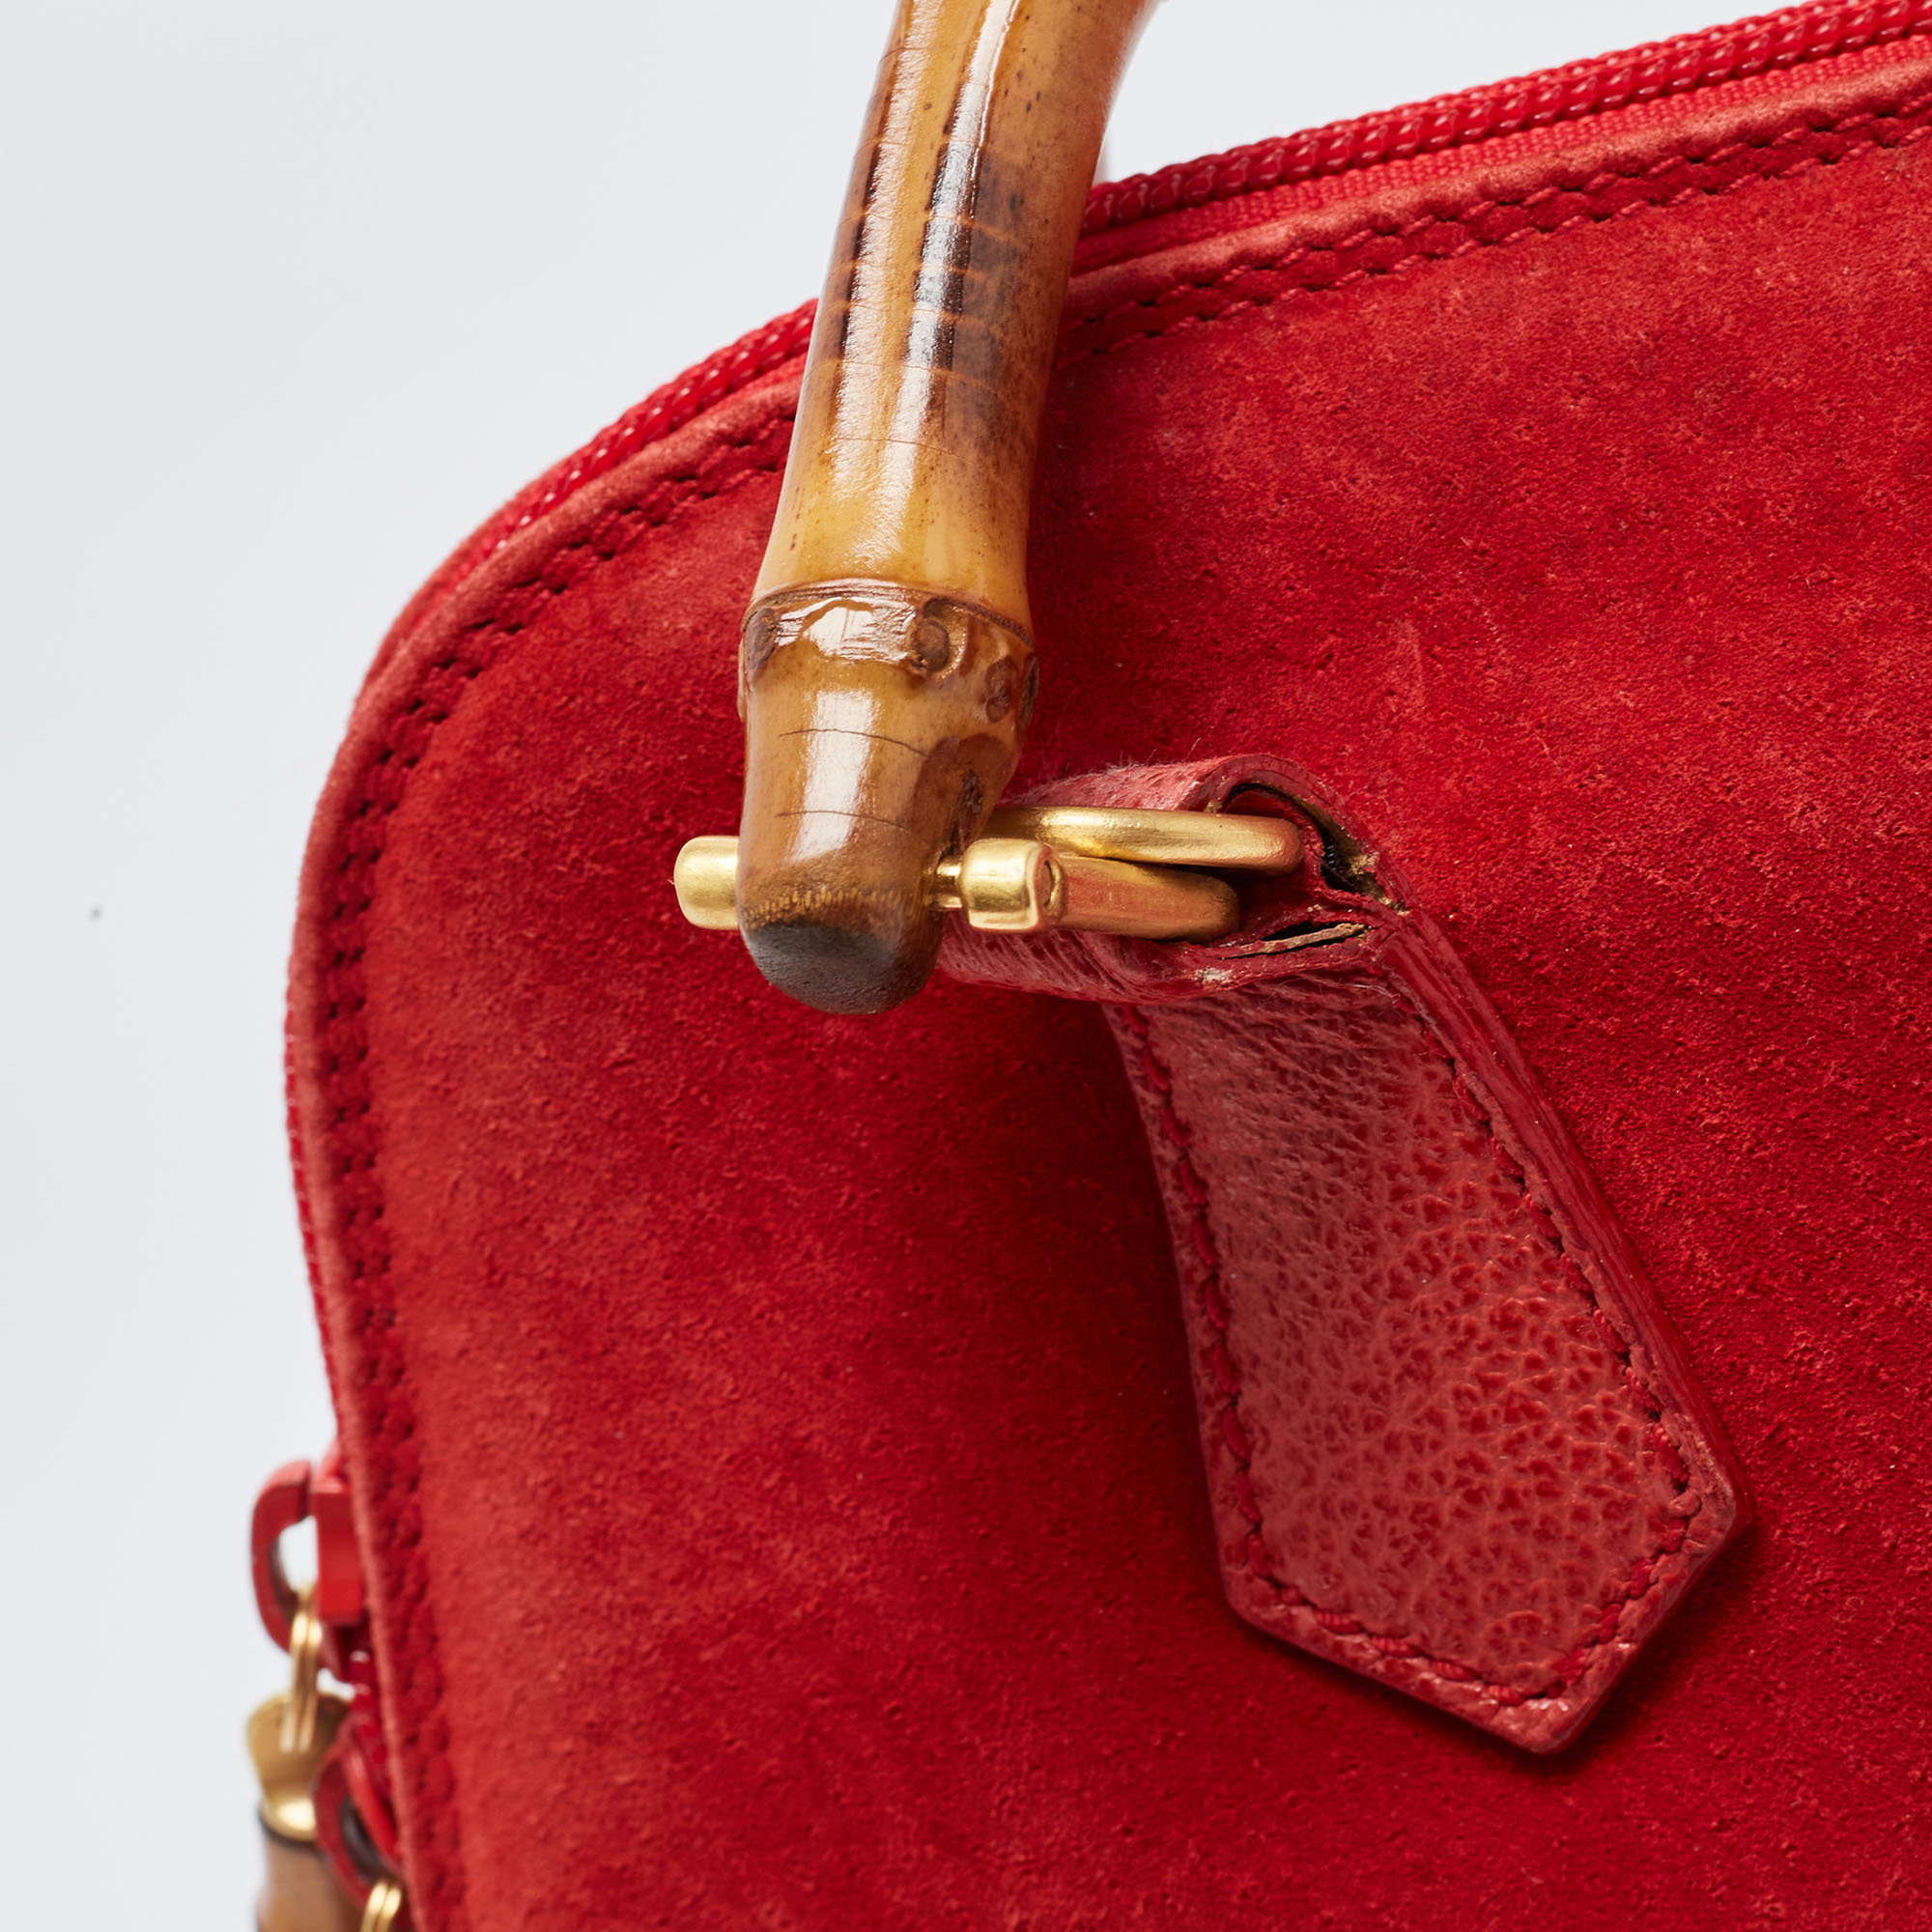 Gucci Red Suede And Leather Bamboo Handle Satchel